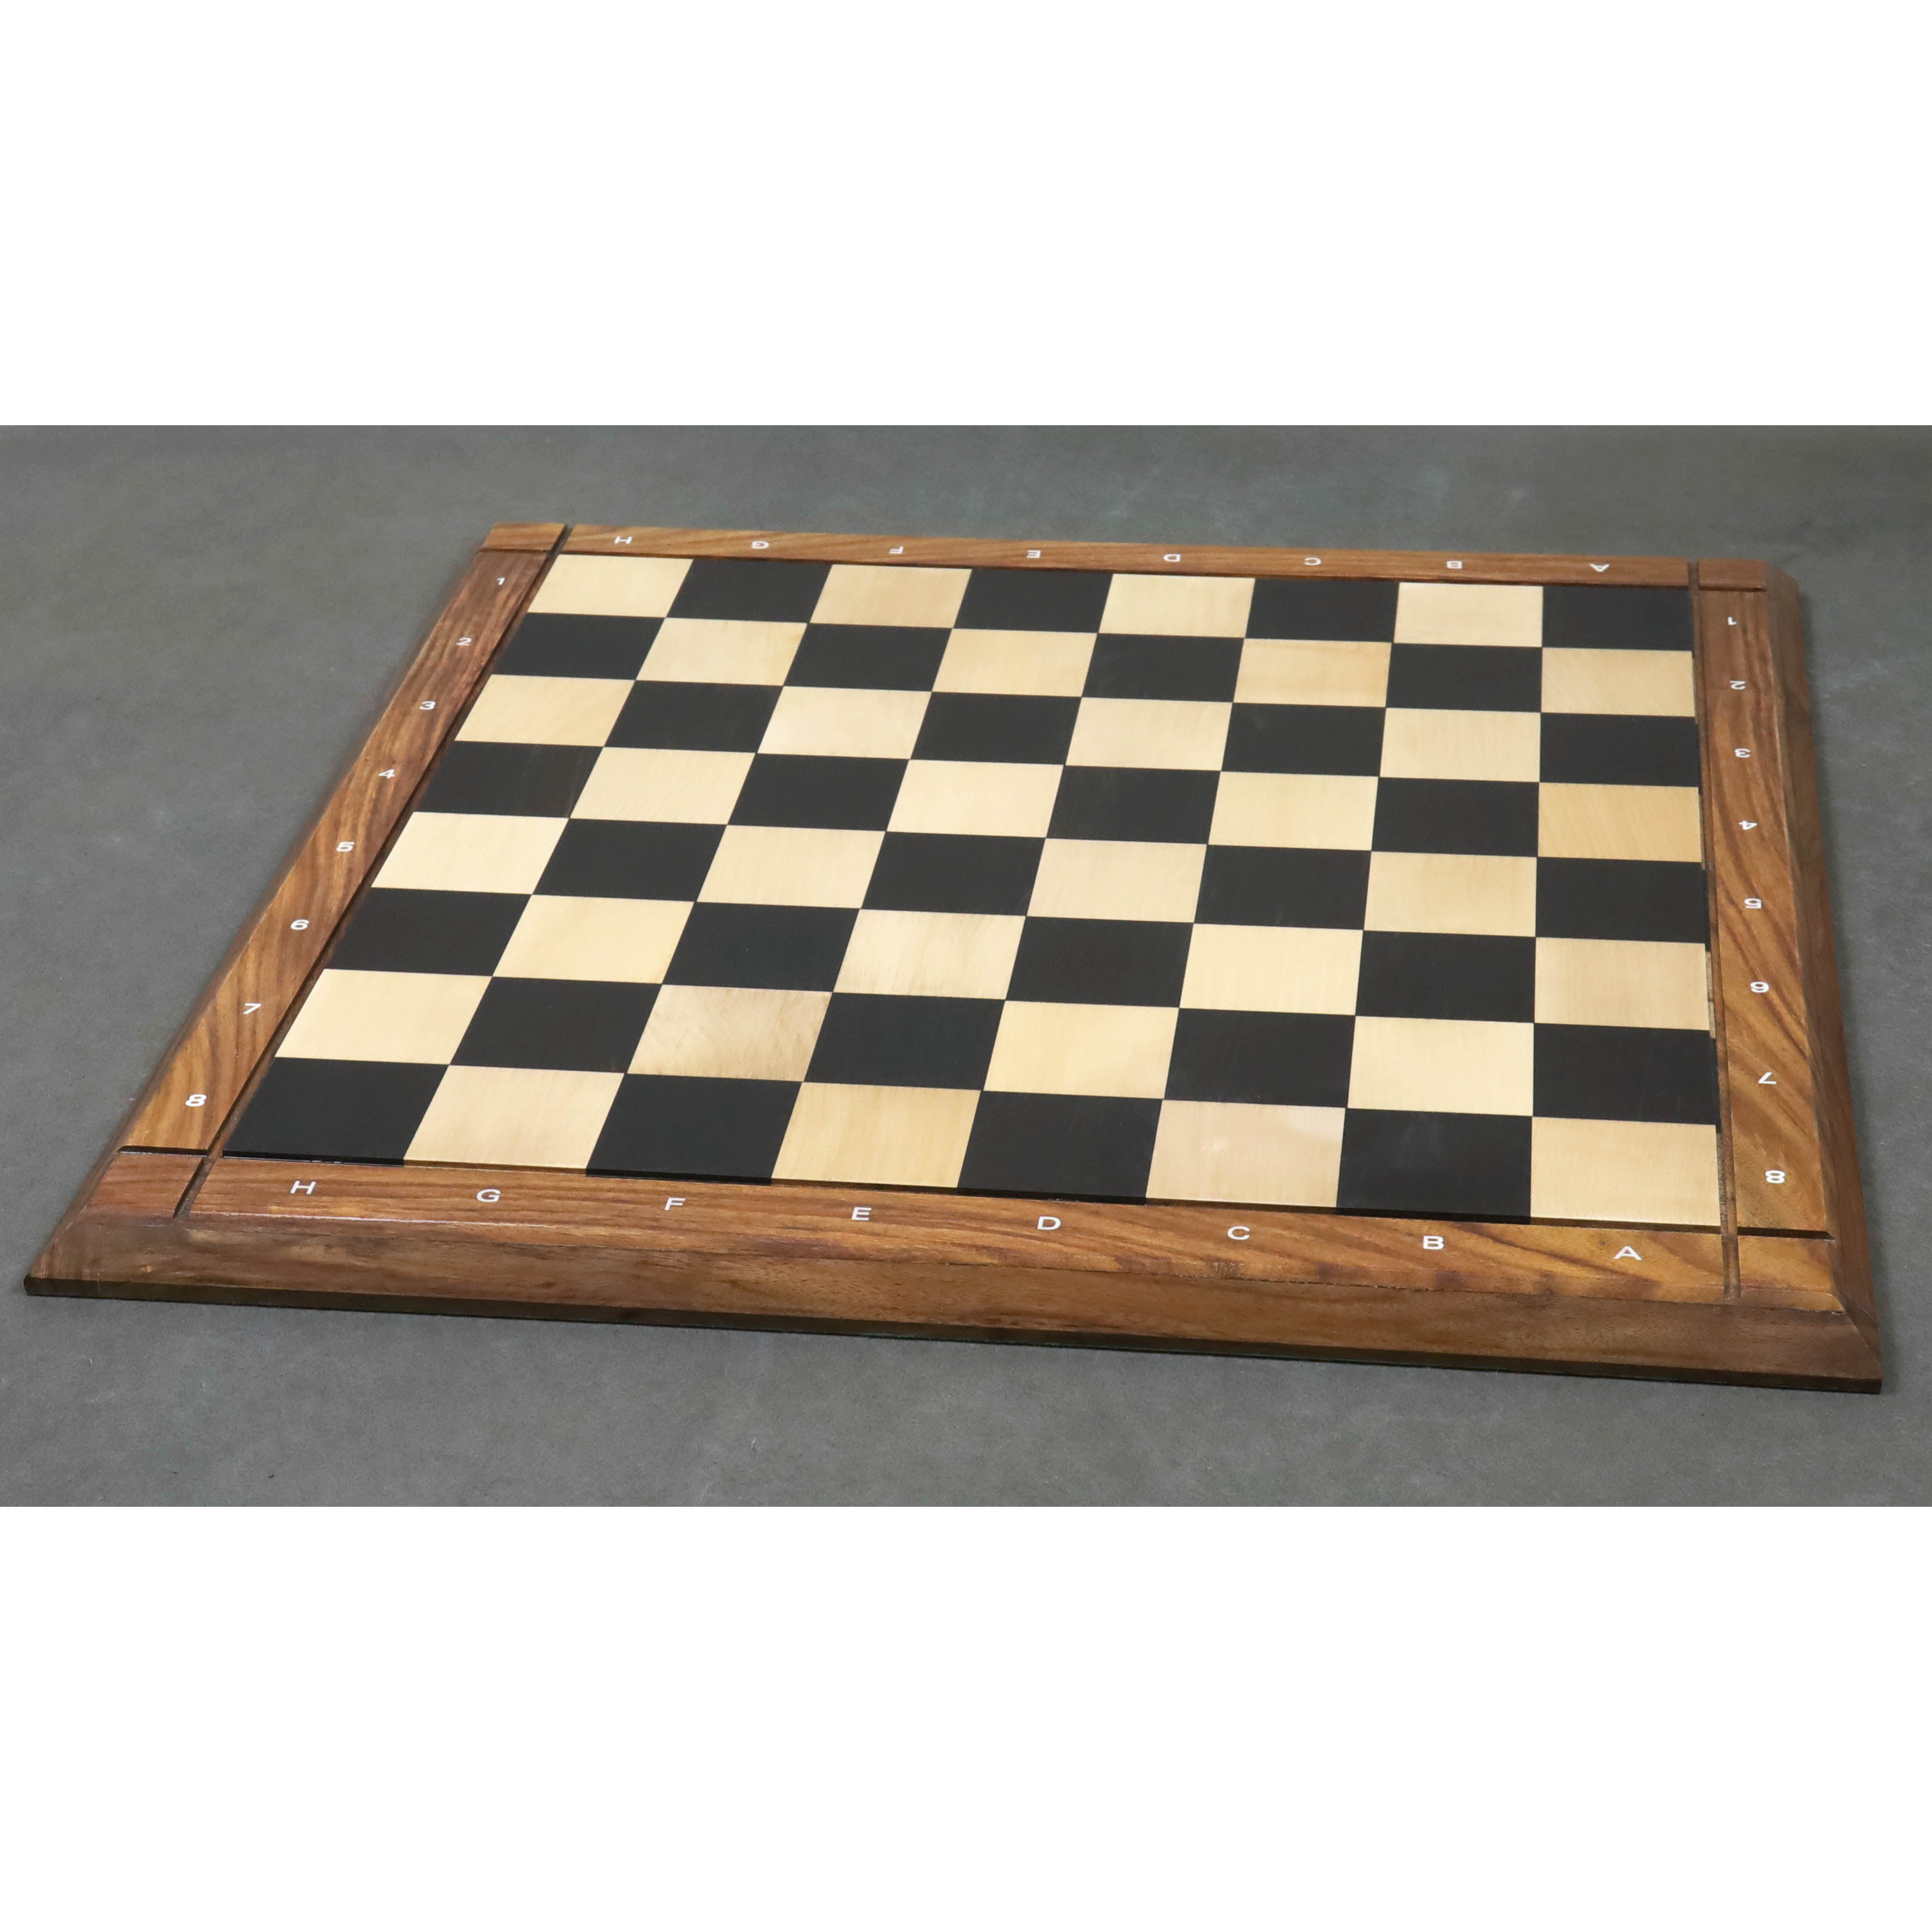 Maple Wood Chess Board With Notations - Foldable Chess Set - Hand Carved Chess Pieces